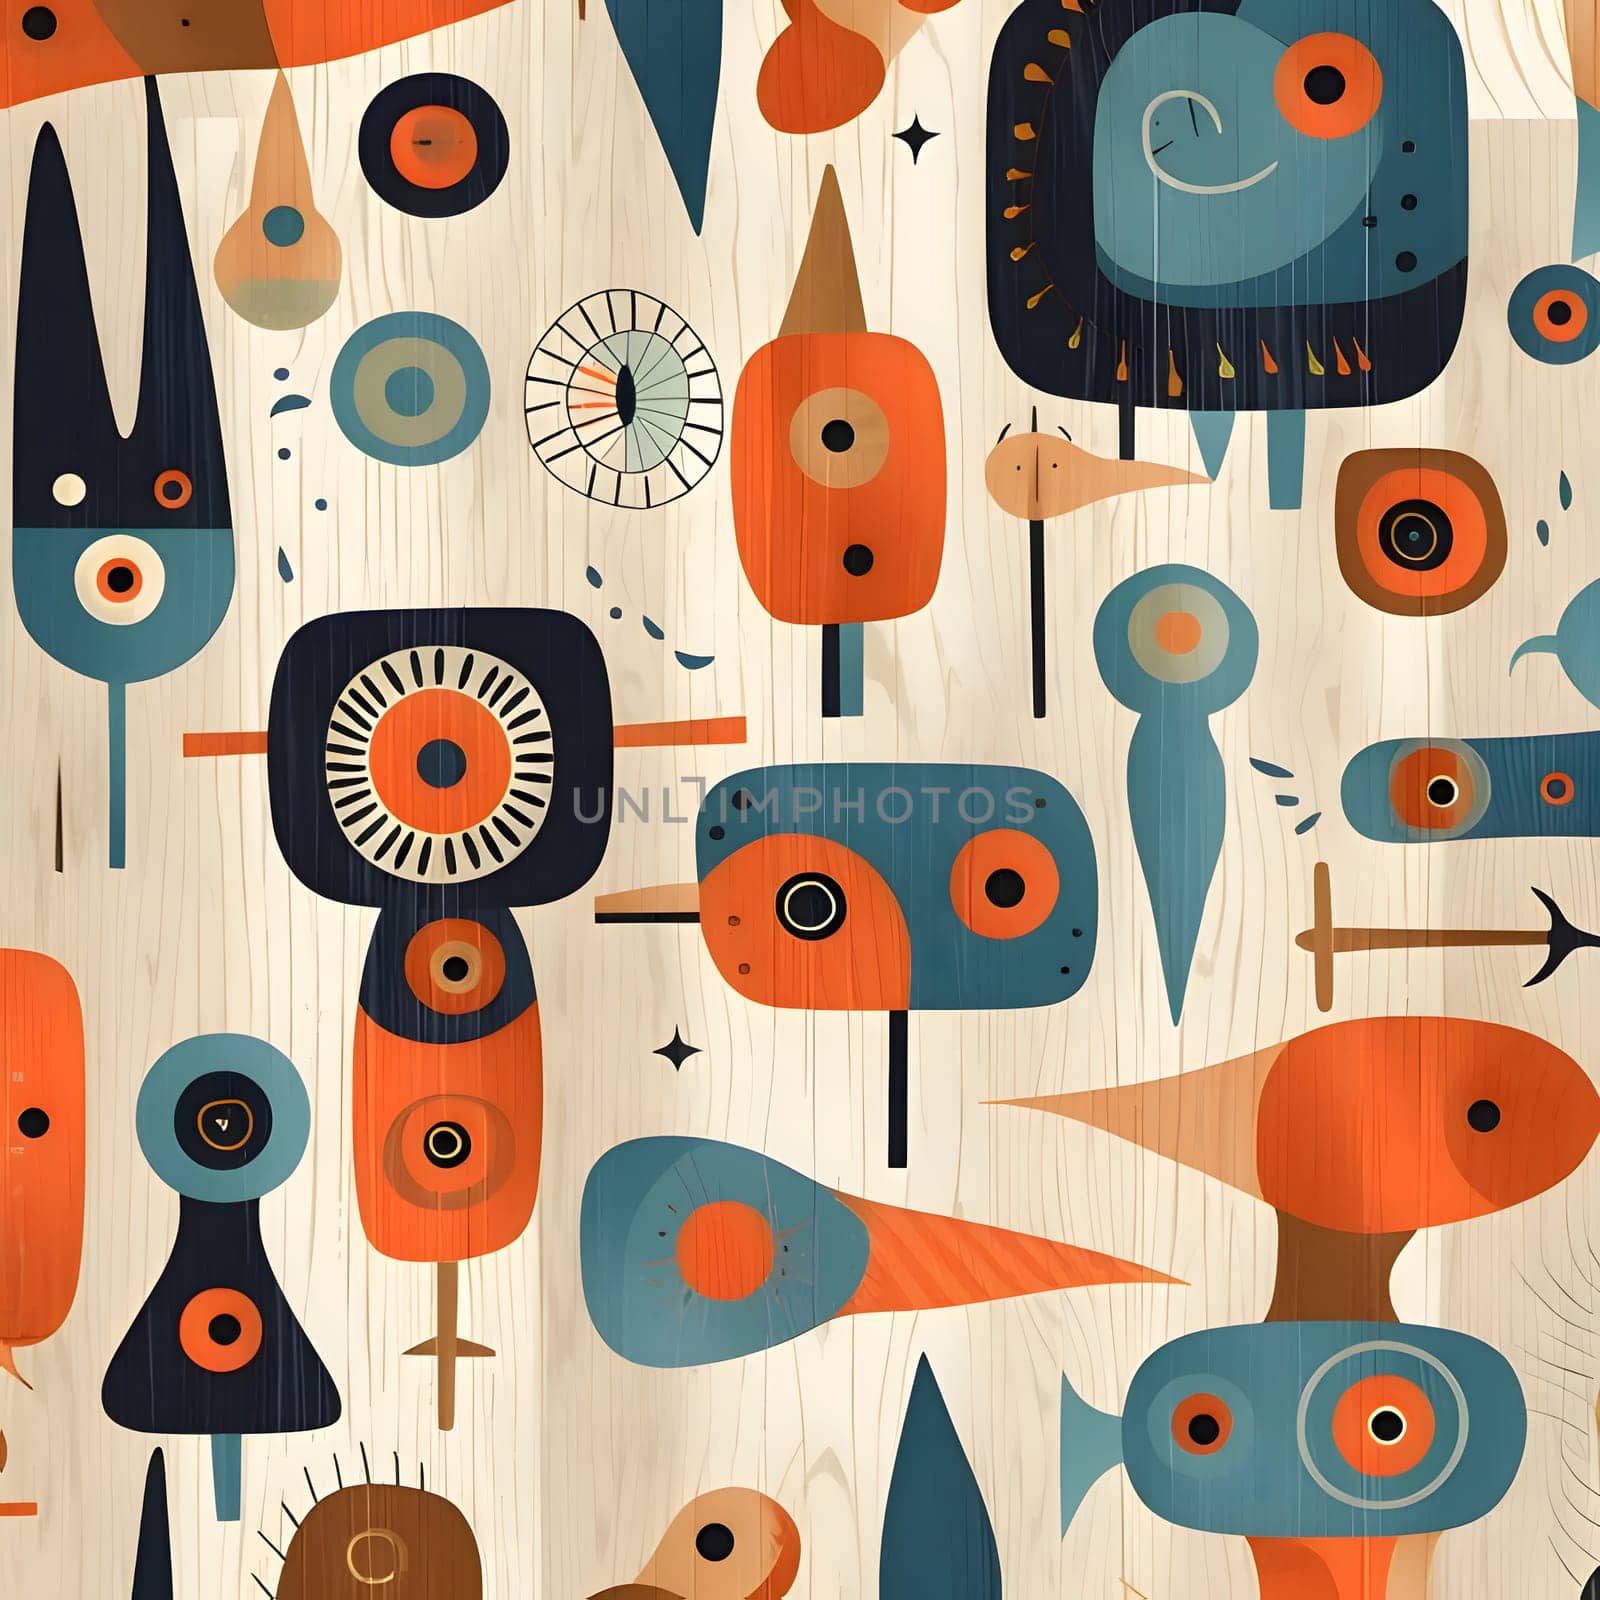 Patterns and banners backgrounds: Seamless pattern with cute monsters on wooden background. Vector illustration.